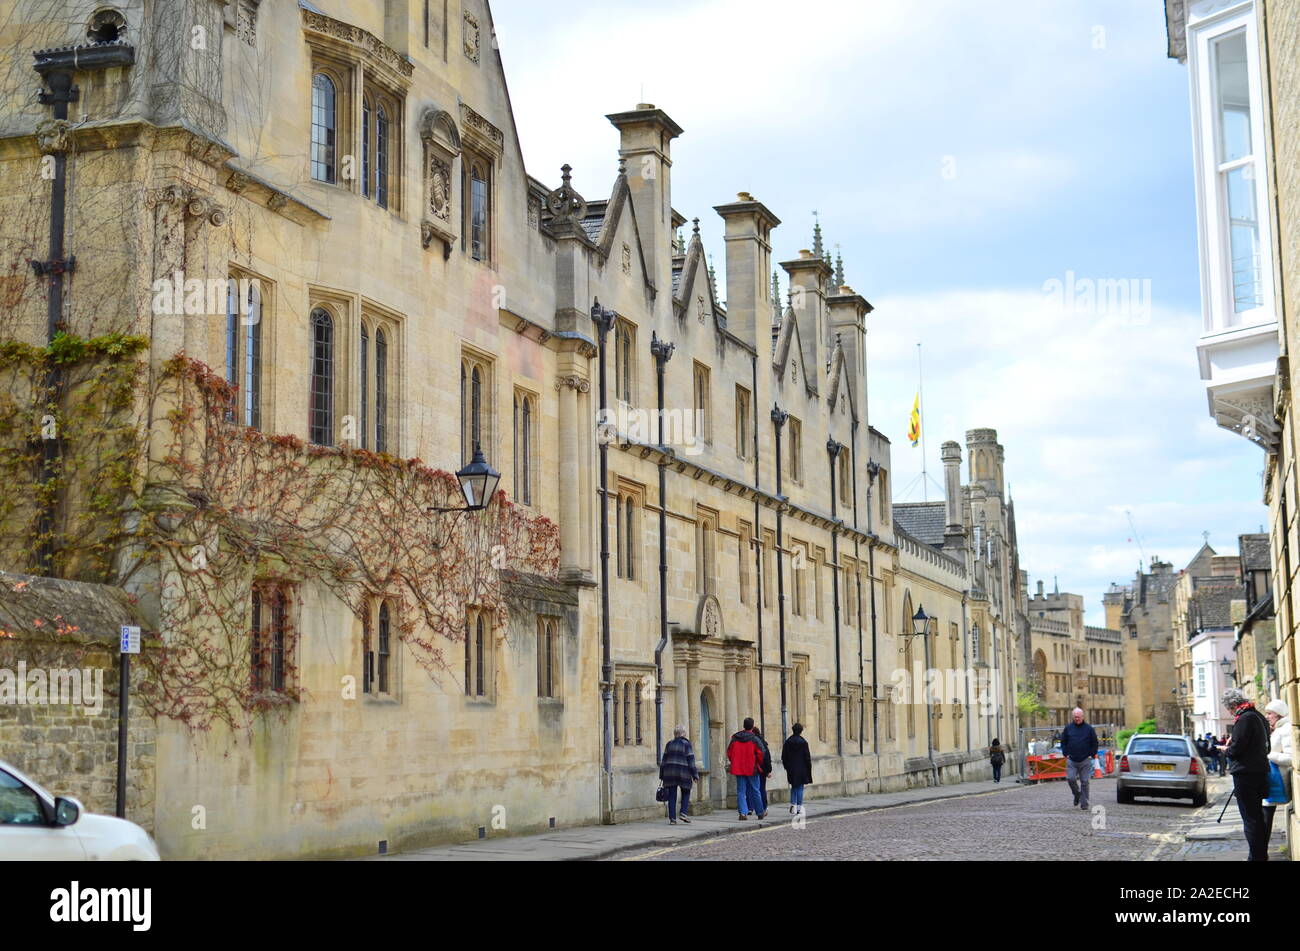 The Merton street in Oxford with Merton College buildings. Stock Photo